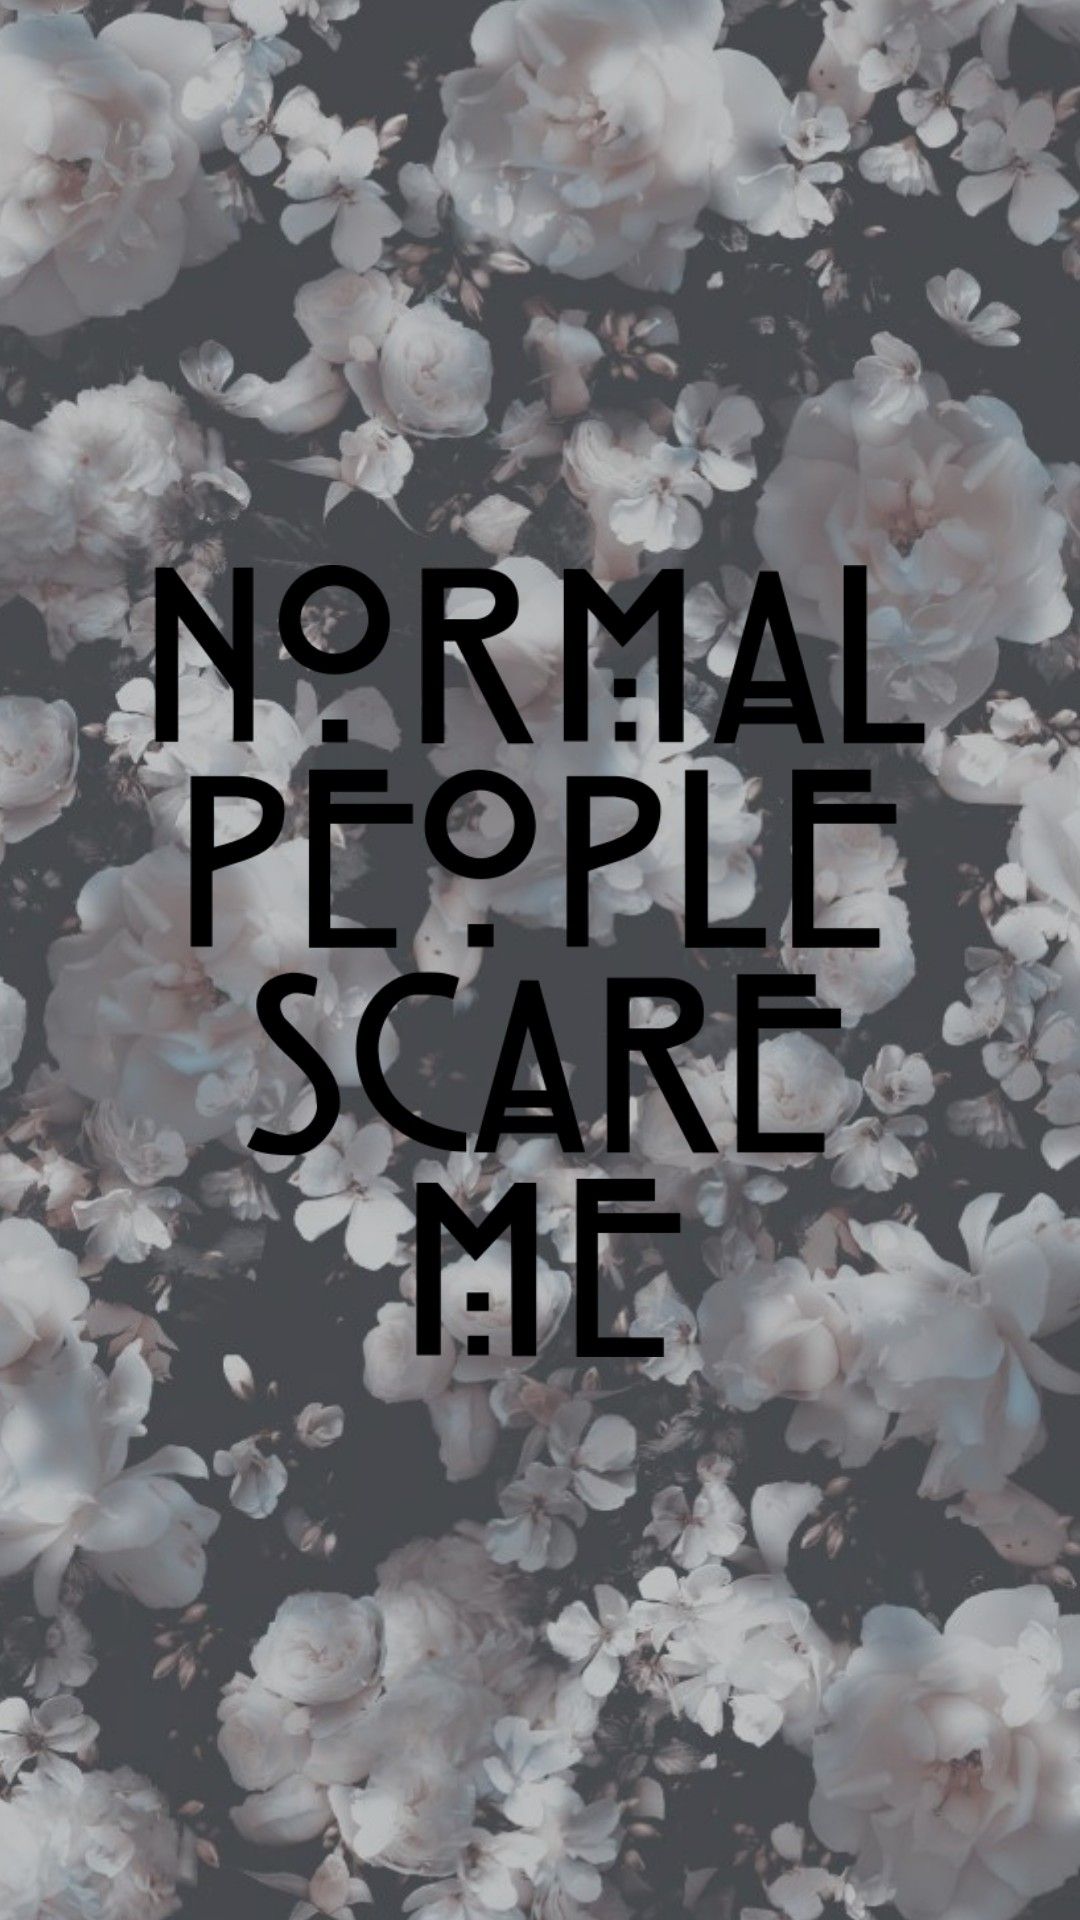 Normal People Scare Me Wallpaper Free Normal People Scare Me Background